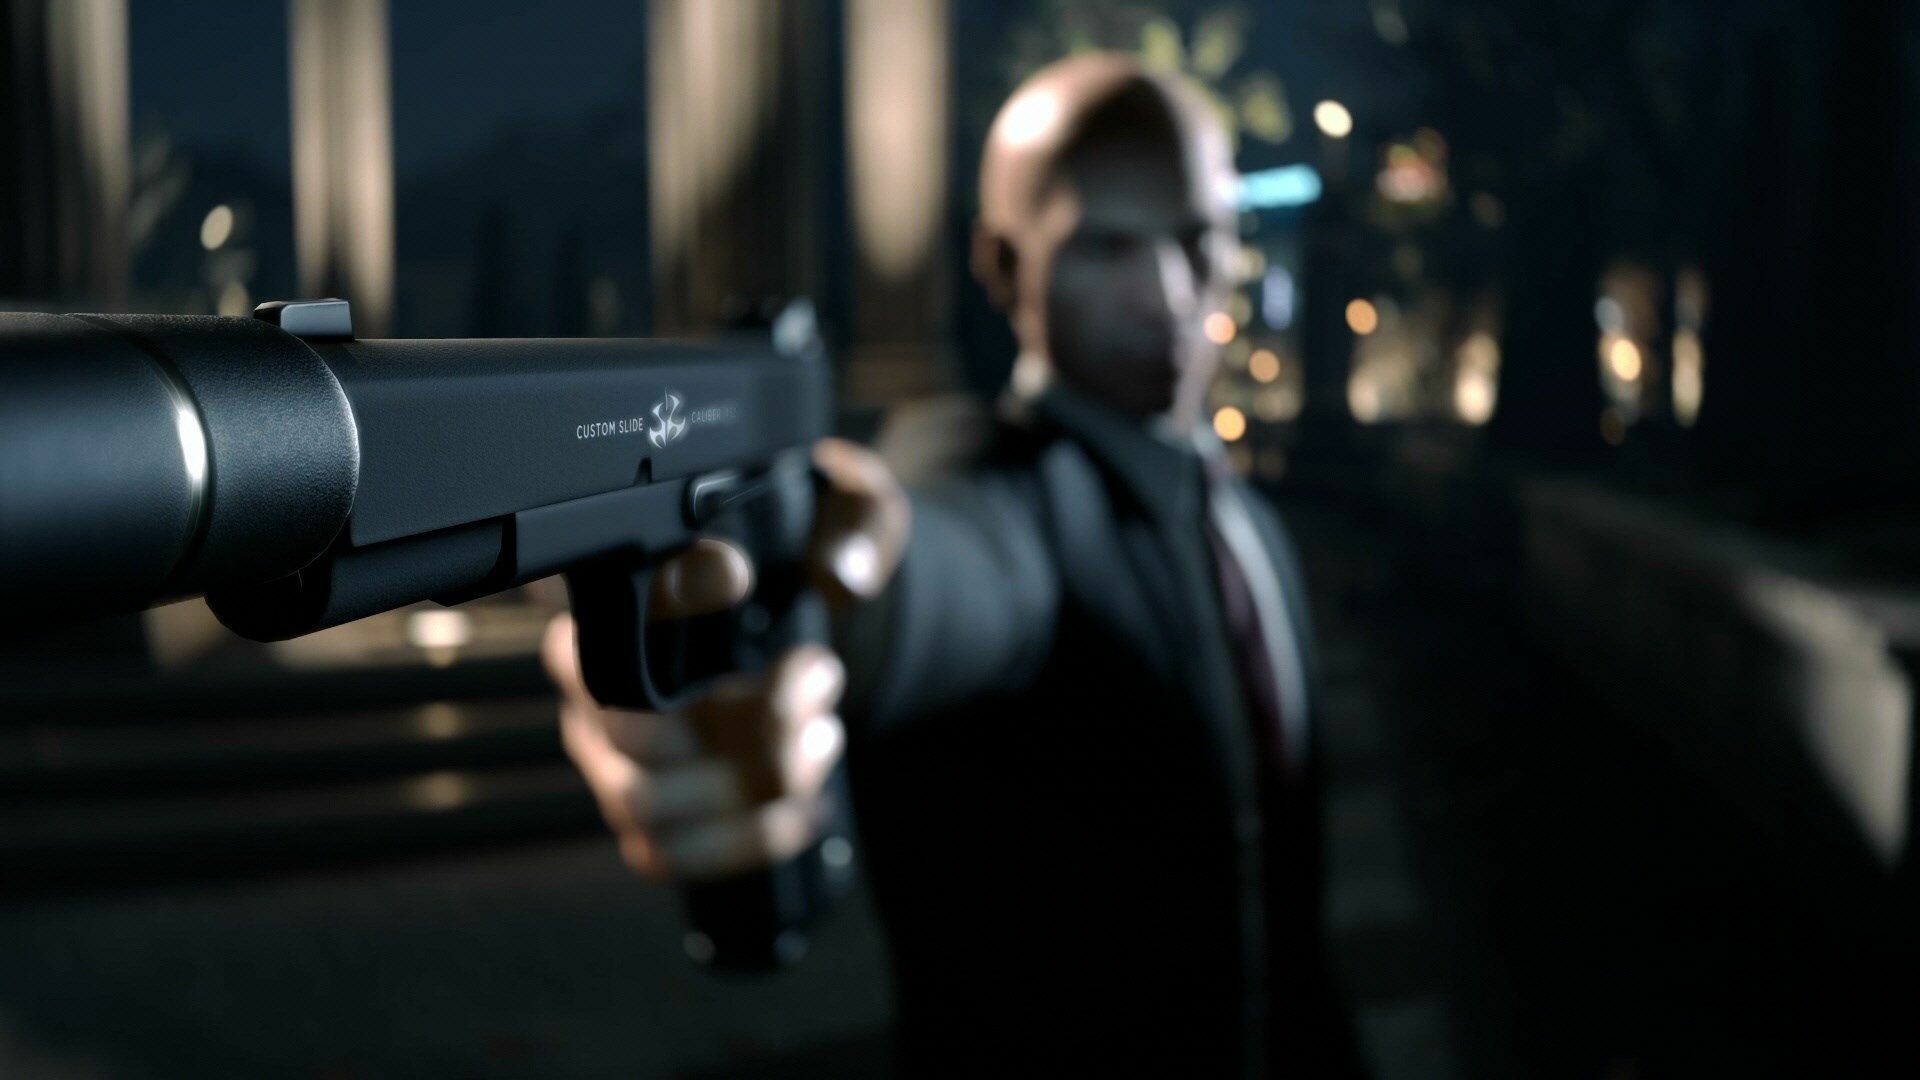 Hitman (Game): Agent 47, A fictional character, the protagonist and the player character. 1920x1080 Full HD Background.